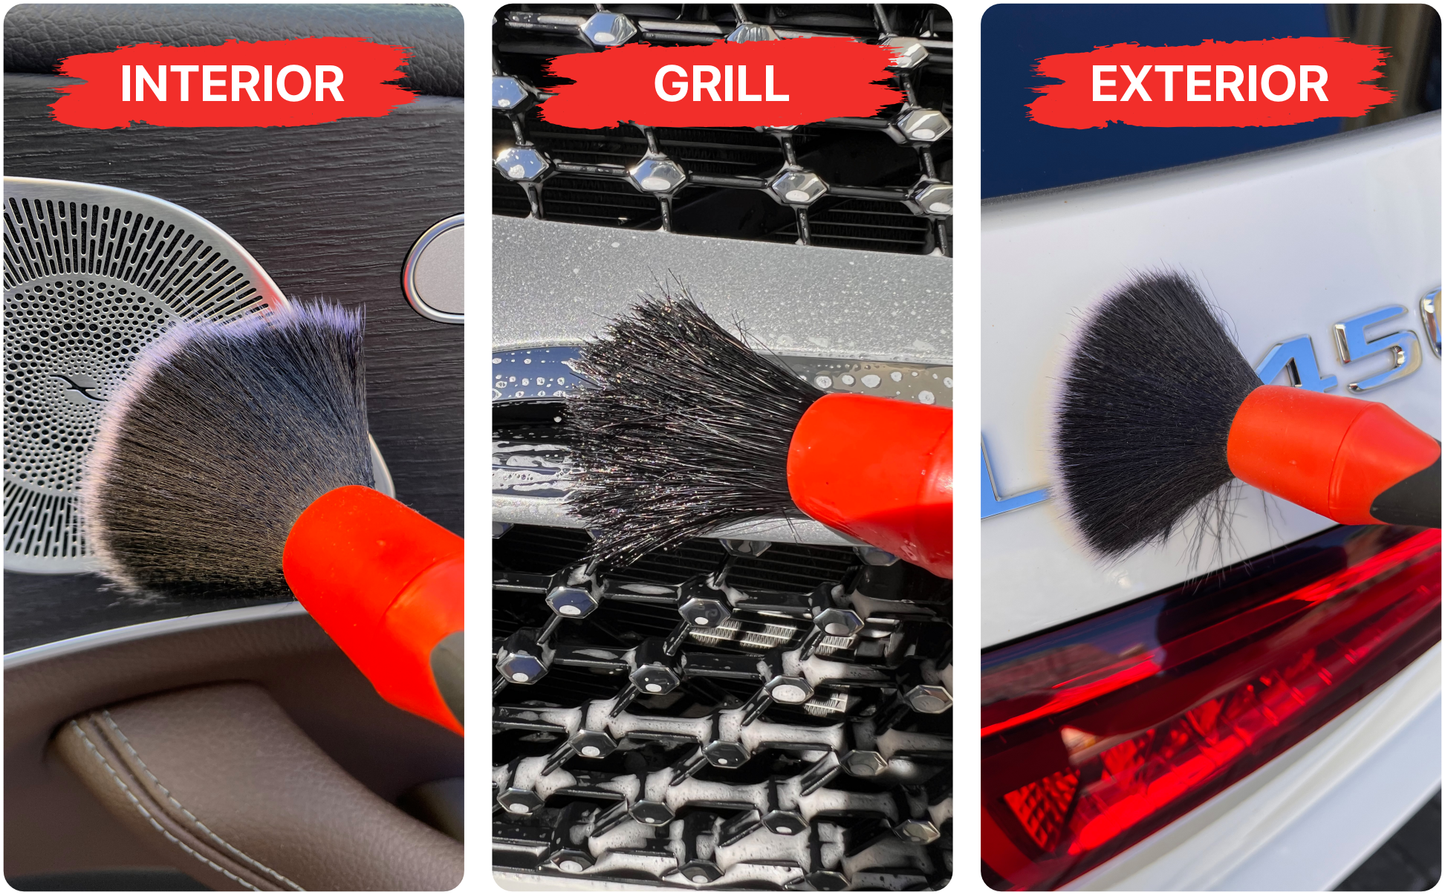 55tech Car Detailing Brush Set - 5 Pack Auto Detail Brush Kit for Automotive – Soft to Firm Brushes for Cleaning and Polishing – Ideal for Interior, Exterior, Dashboard, Wheel Rims, Air Vent, Seat